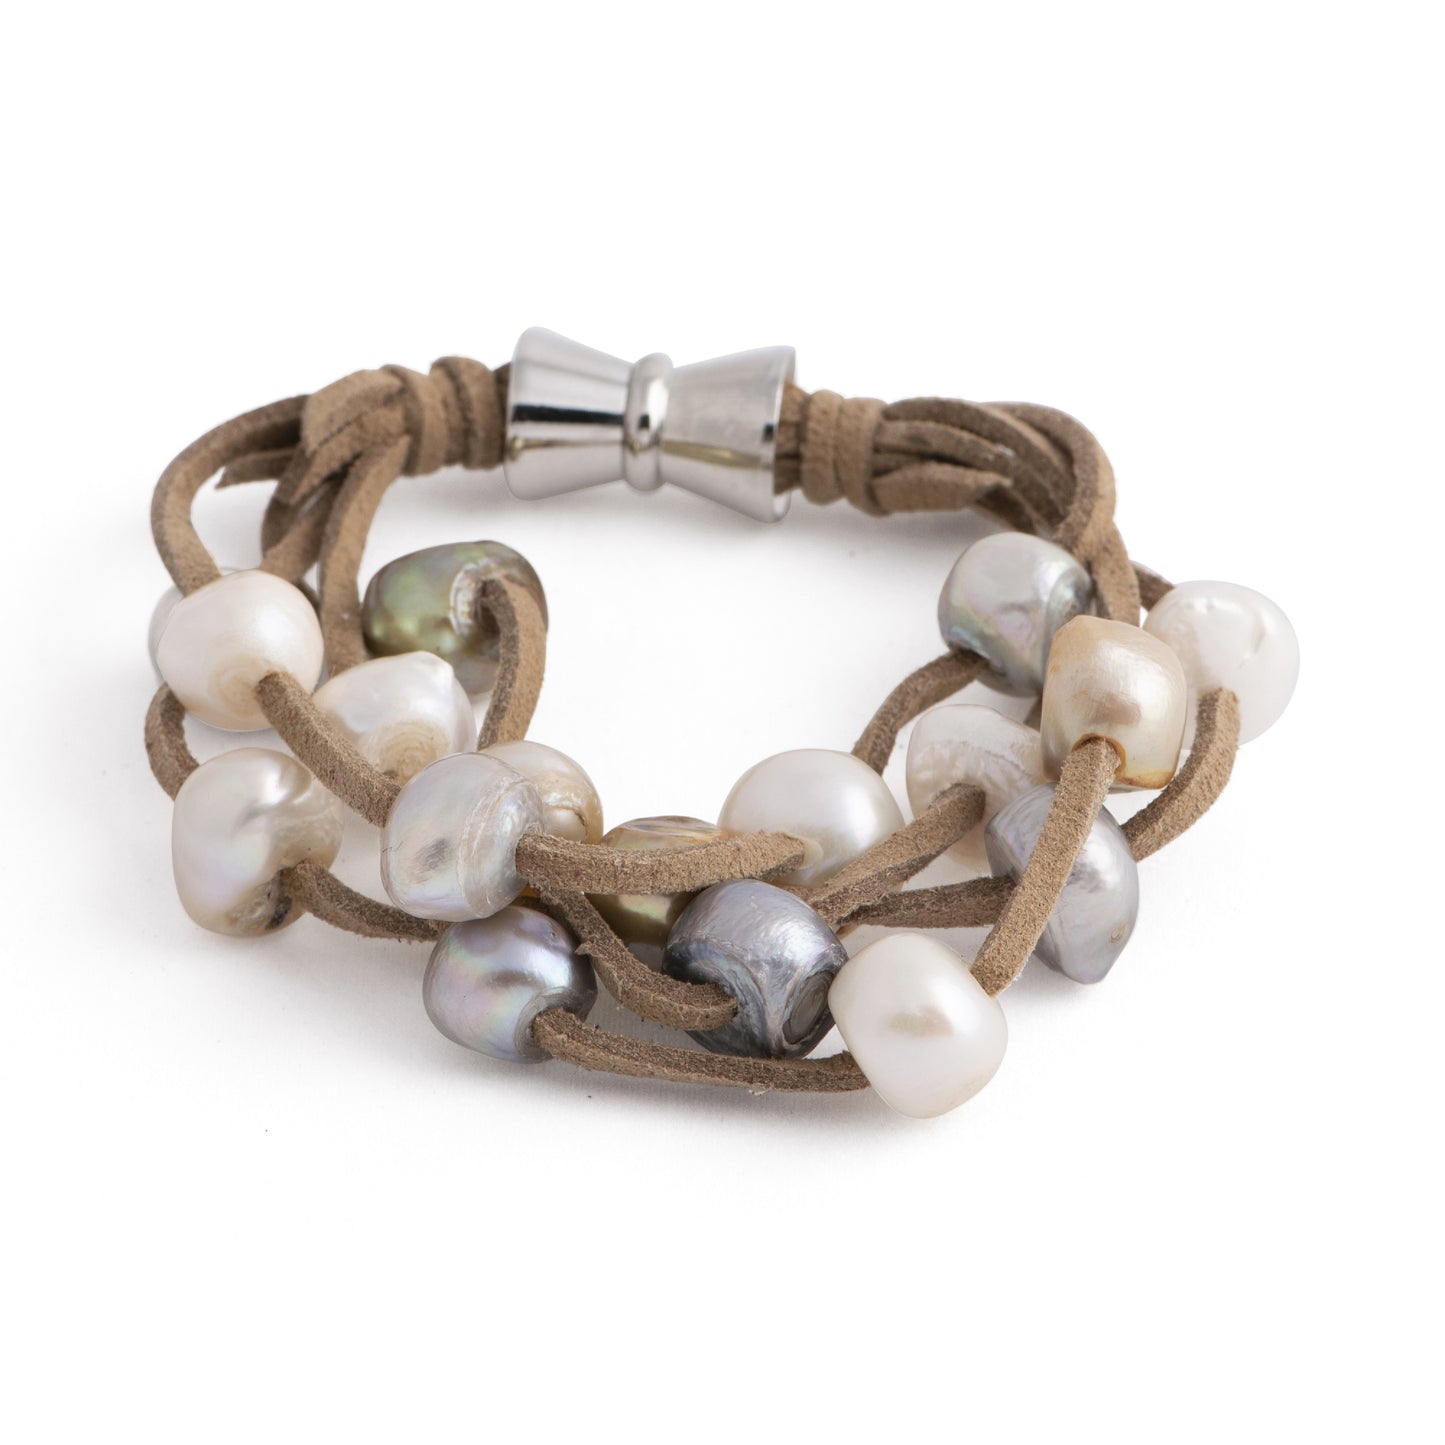 Bengal - Suede multi-layer bracelet with freshwater pearls and magnetic clasp (Tan suede, multicolor pearls)